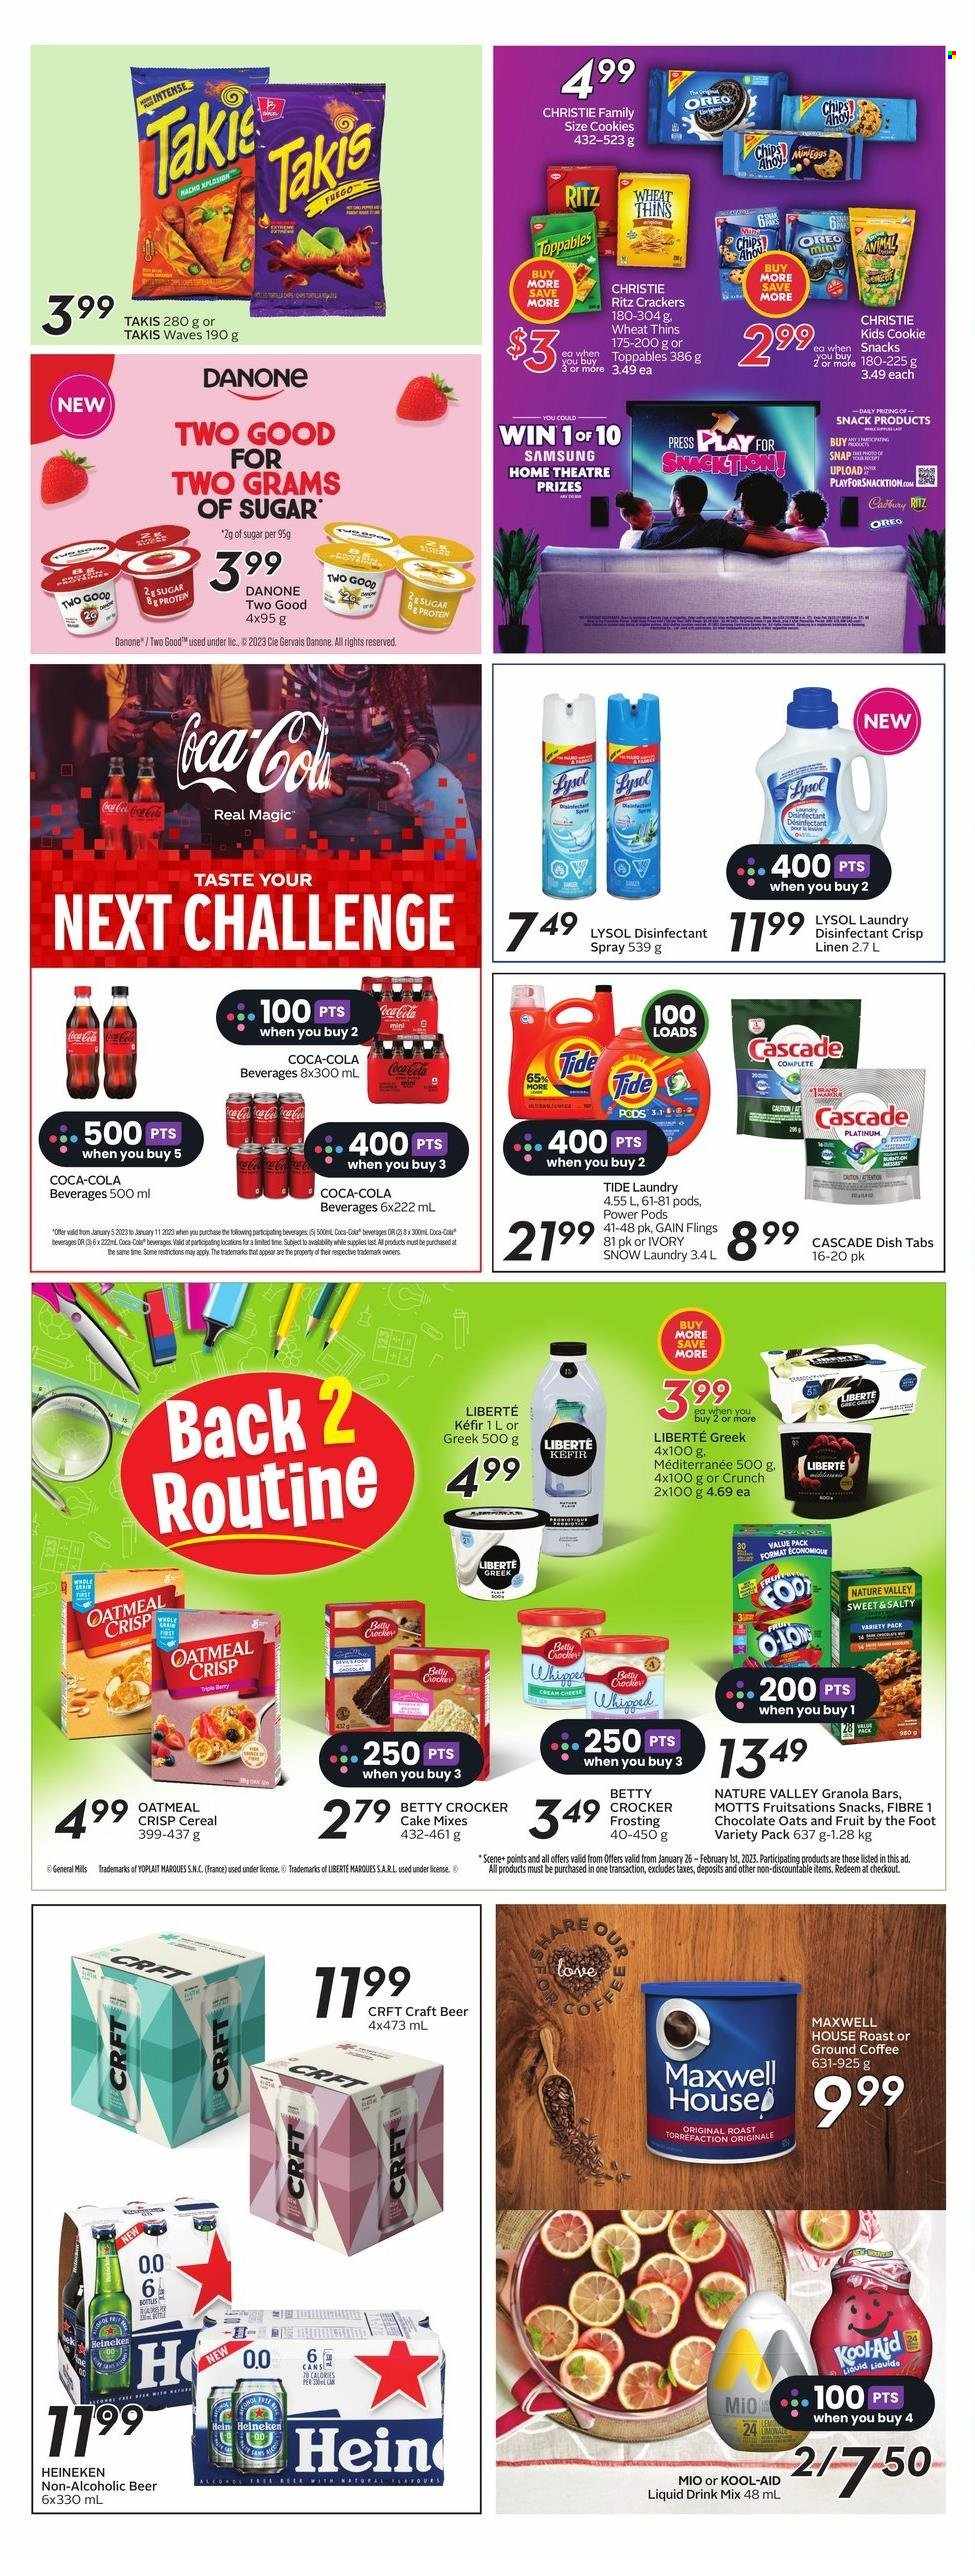 thumbnail - Sobeys Flyer - January 26, 2023 - February 01, 2023 - Sales products - cake, Mott's, Yoplait, kefir, eggs, whipped cream, cookies, chocolate, snack, crackers, Cadbury, RITZ, chips, Thins, frosting, sugar, oatmeal, oats, cereals, granola bar, Nature Valley, Coca-Cola, Maxwell House, coffee, ground coffee, beer, Heineken, Gain, Lysol, Tide, Cascade, antibacterial spray, kool aid, Oreo, Danone, desinfection. Page 16.